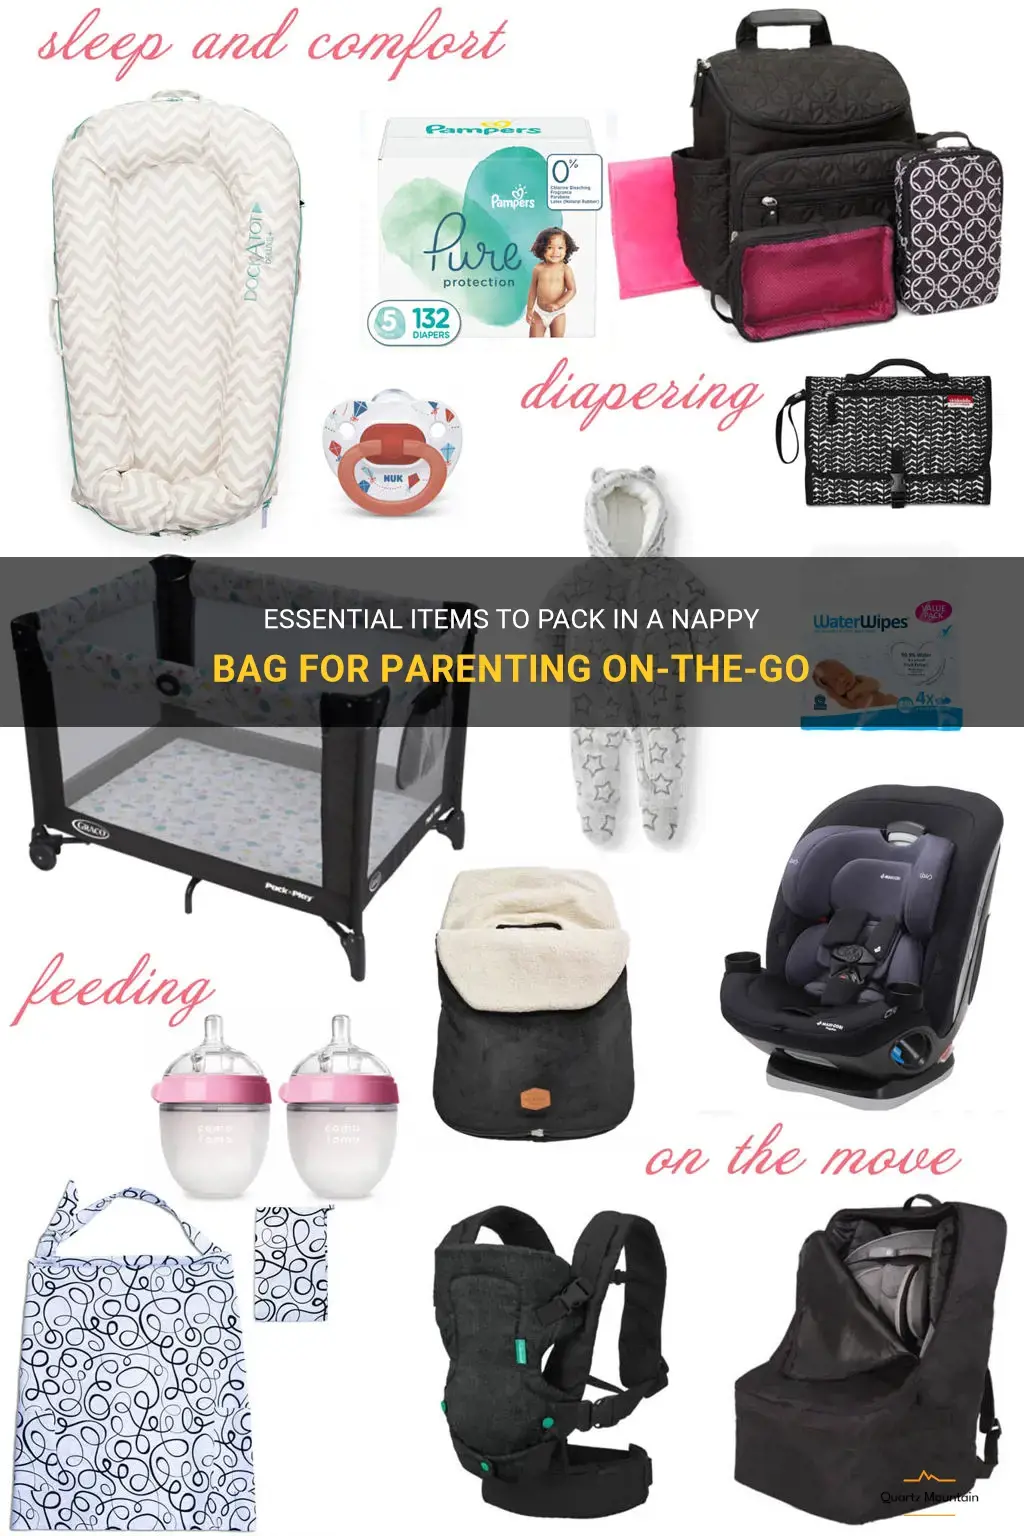 what do I need to pack in a nappy bag